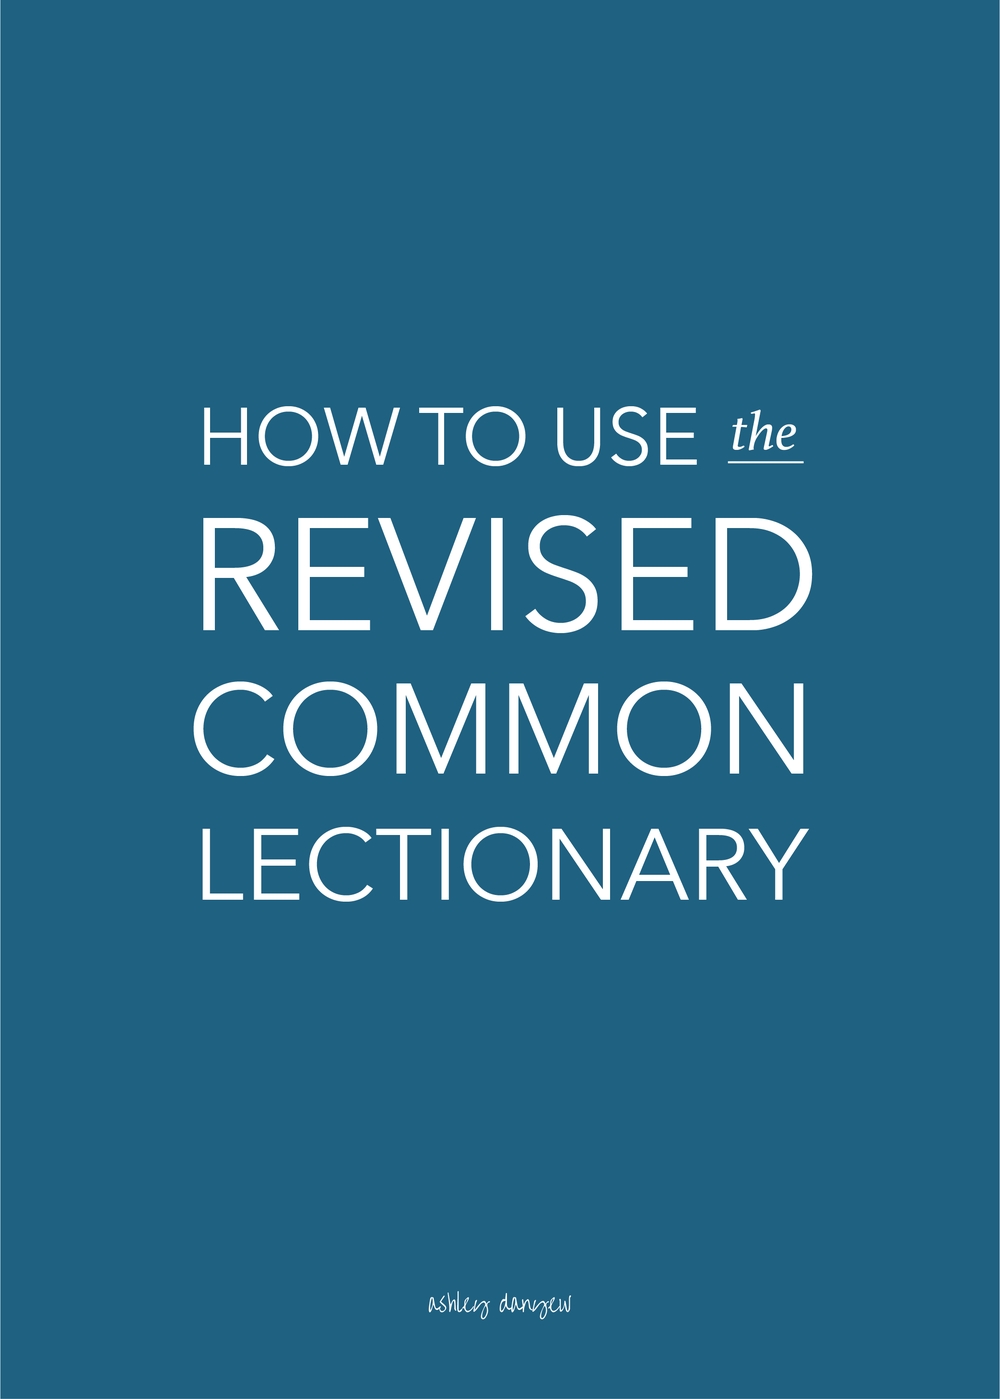 How To Use The Revised Common Lectionary | Ashley Danyew  Revised Methodist Lectionary